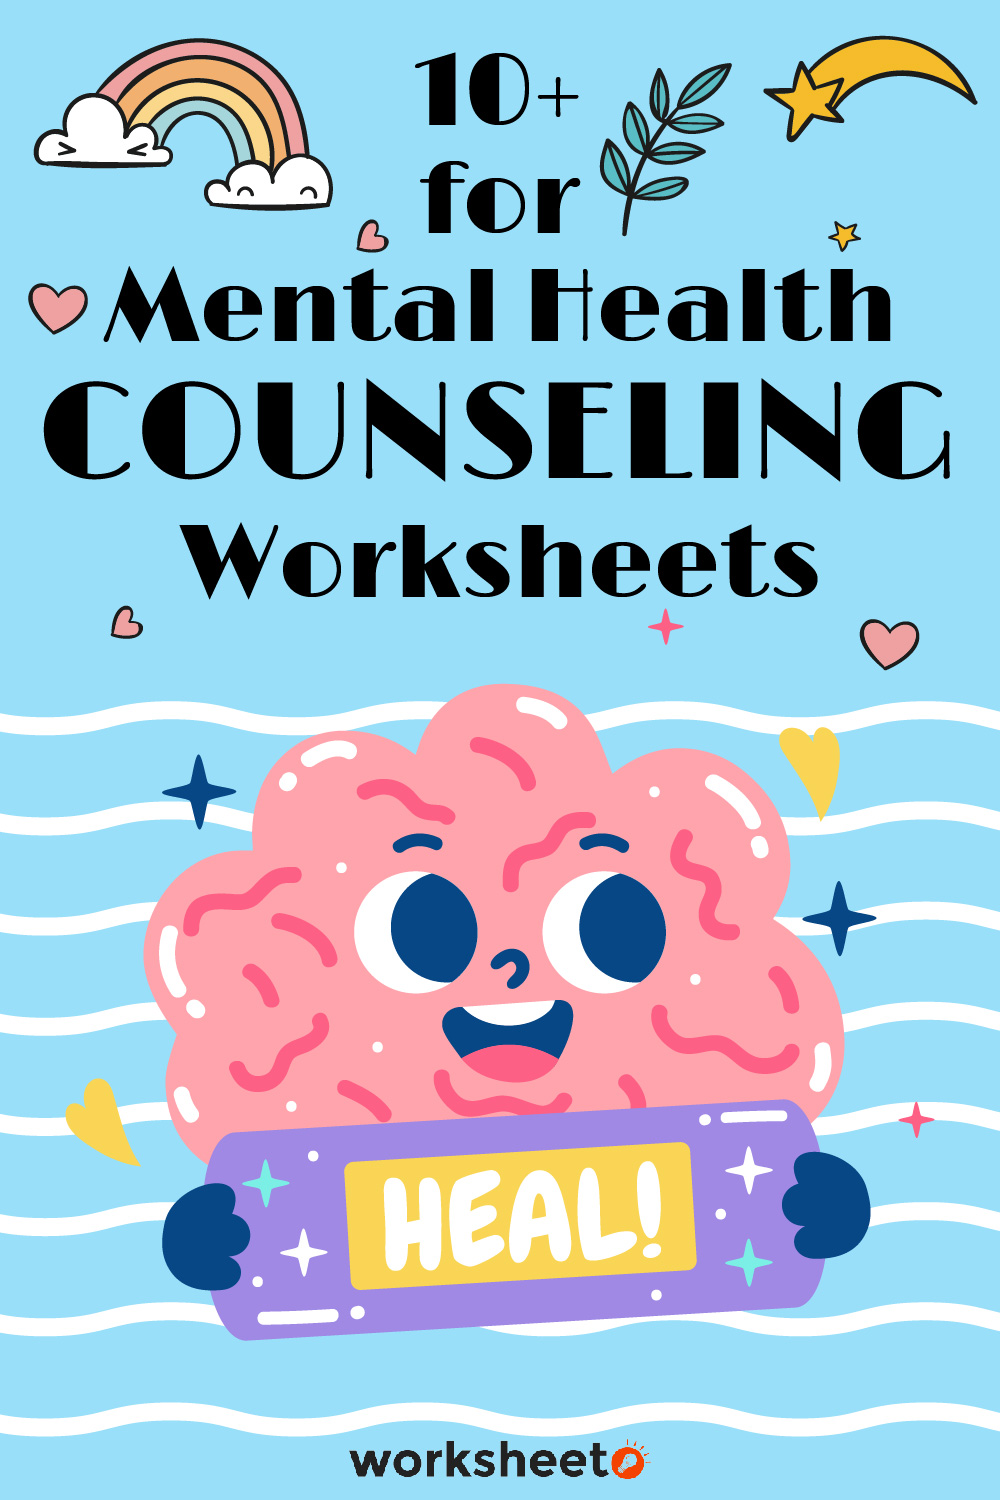 For Mental Health Counseling Worksheets